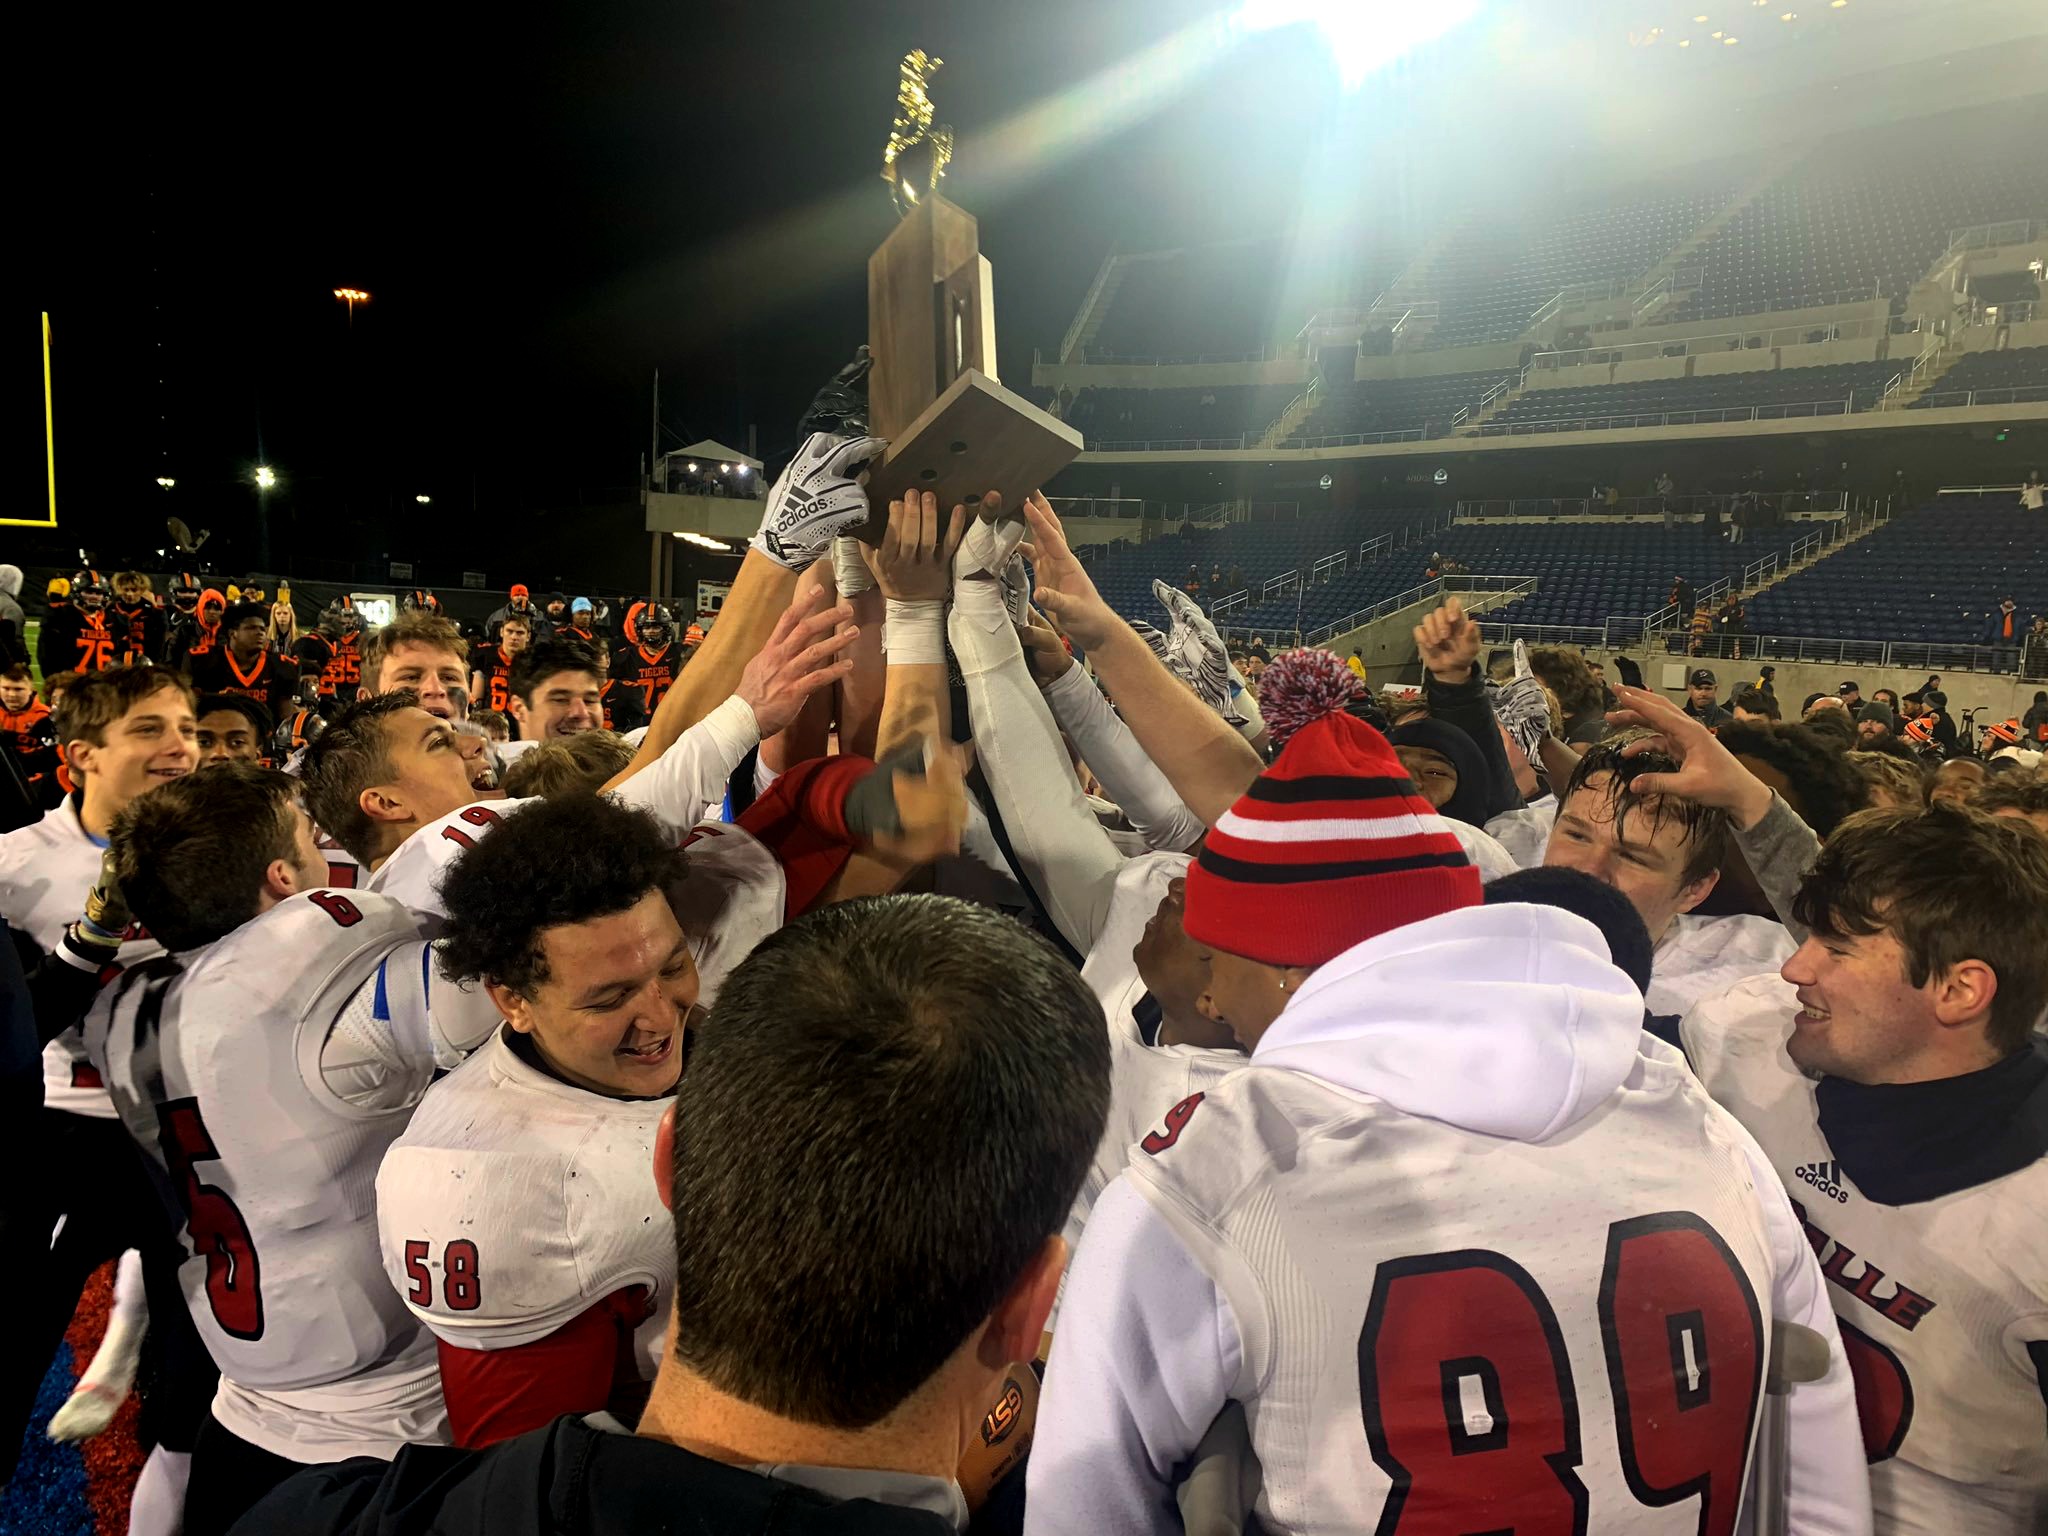 Photo Essay A Championship Night for the La Salle Lancers